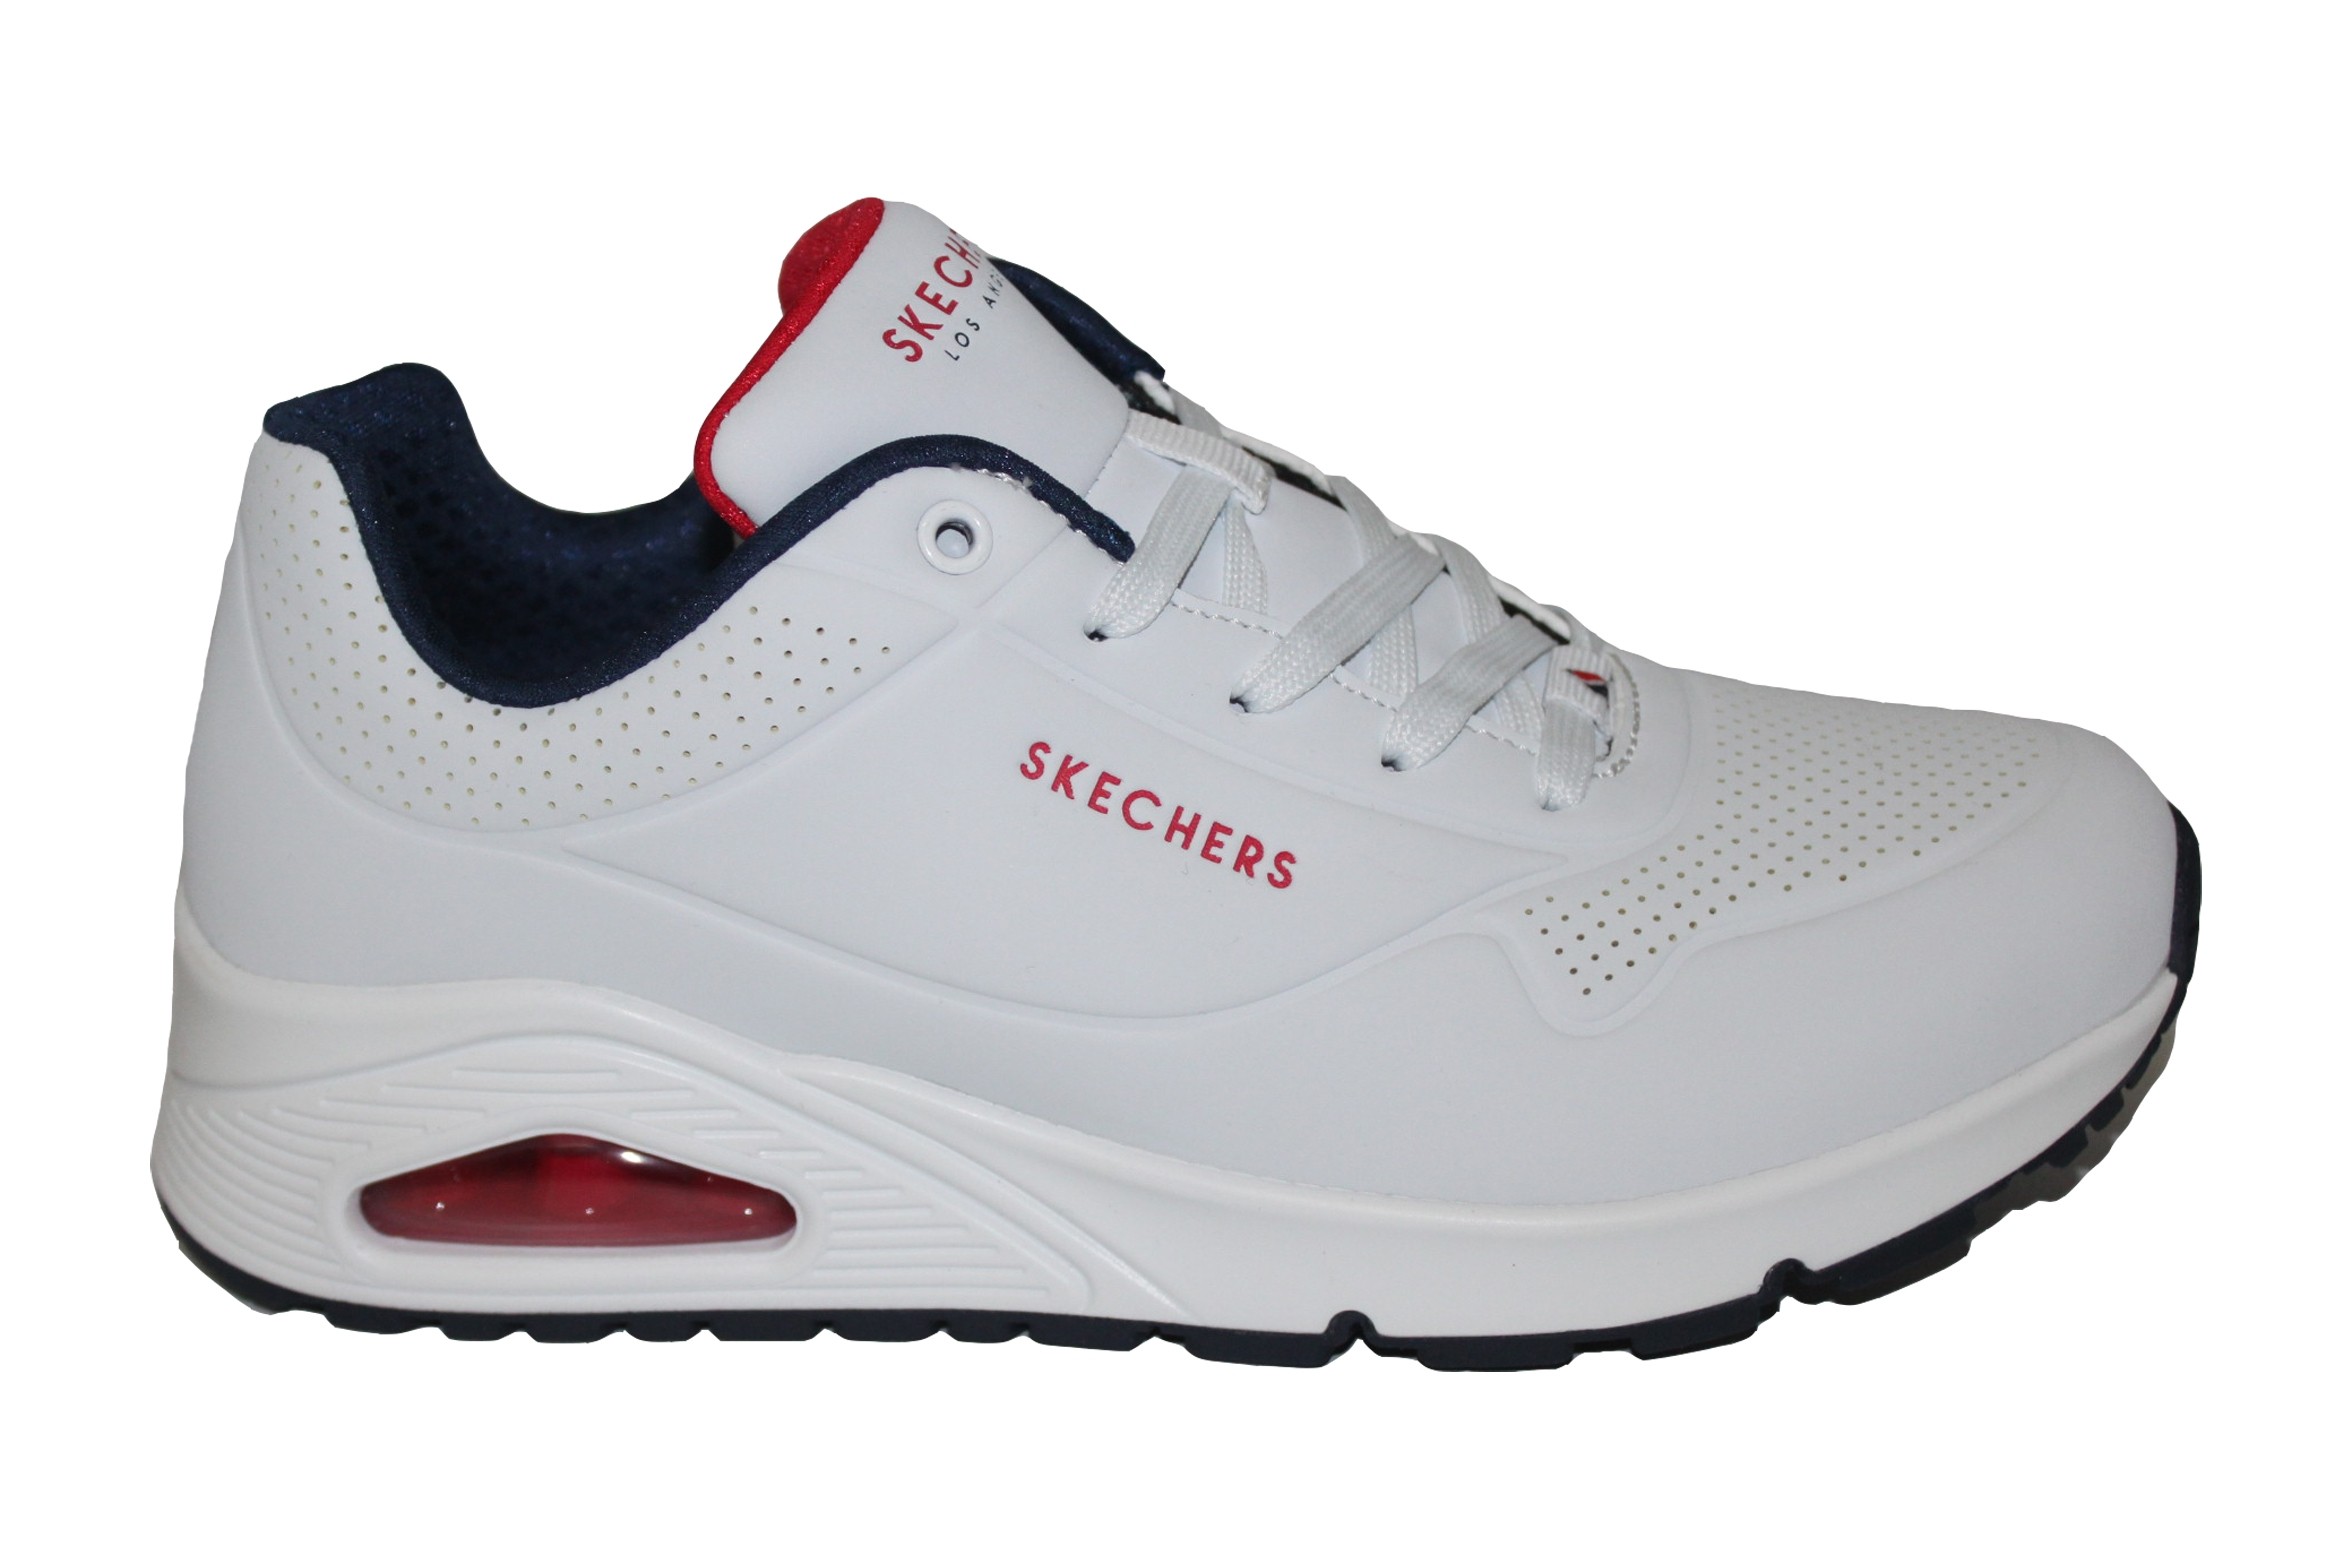 skechers with air bubble